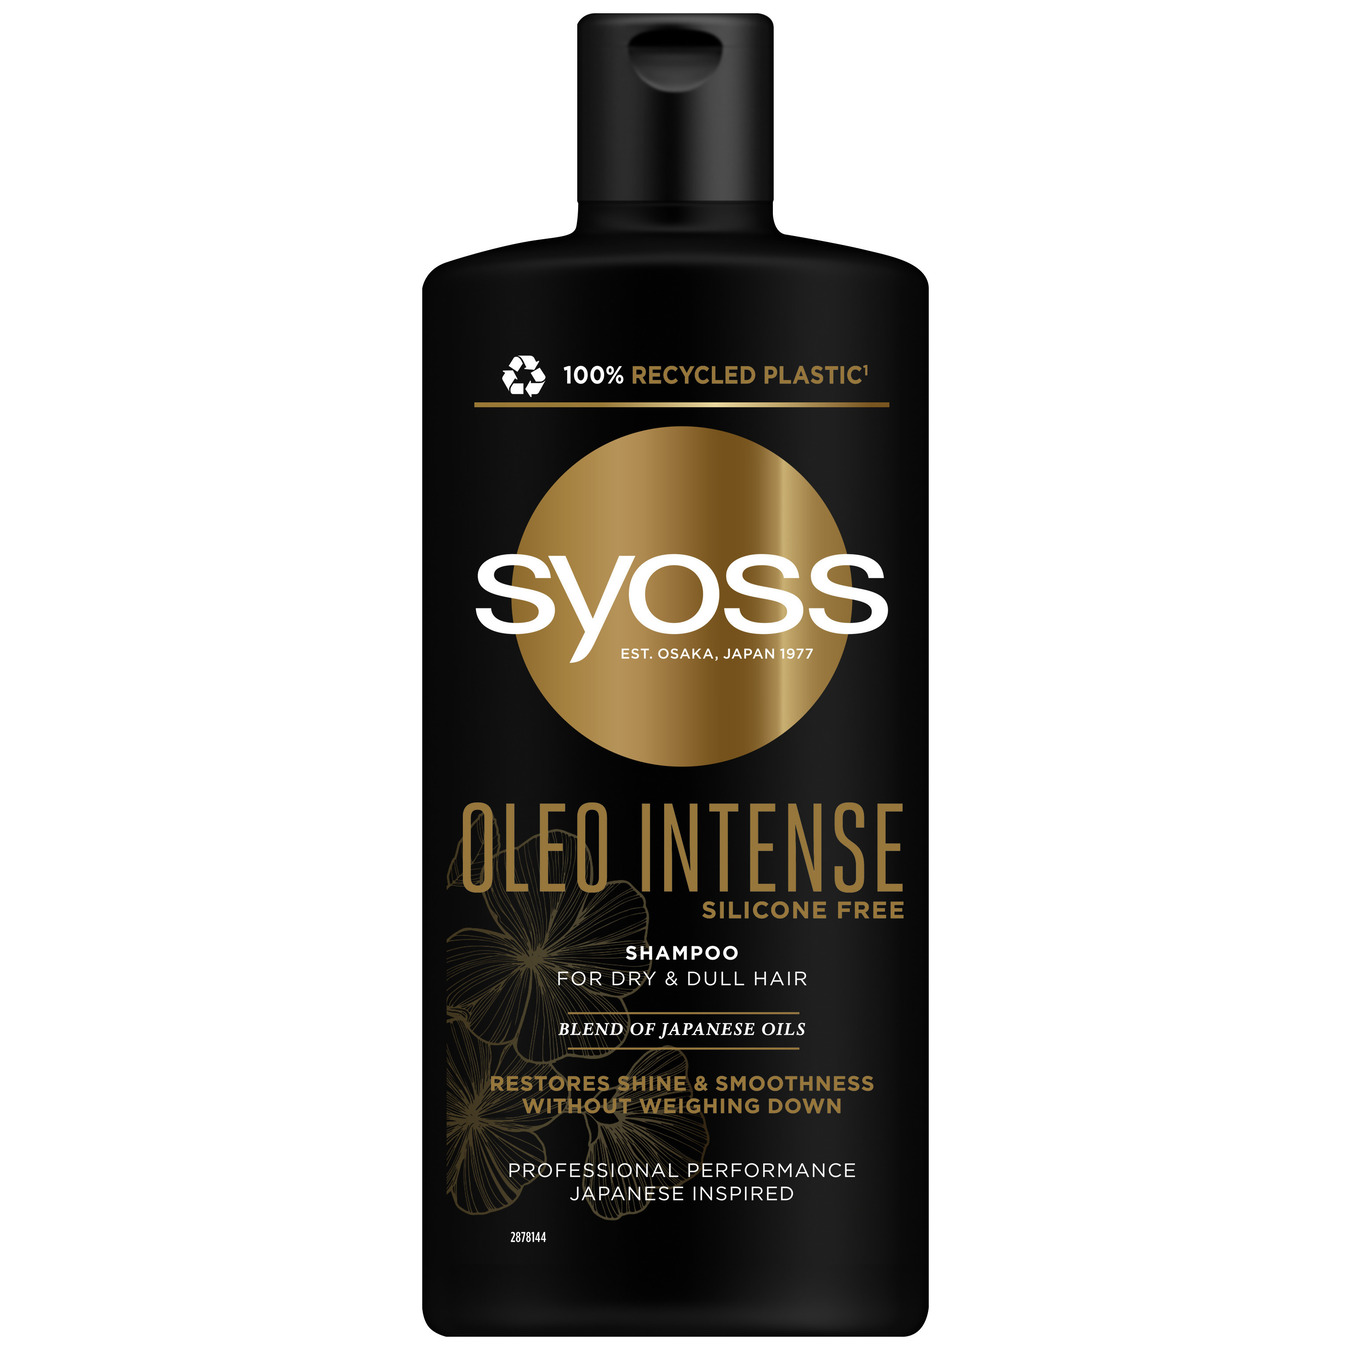 Syoss Oleo Intense shampoo for dry and dull hair 440 ml